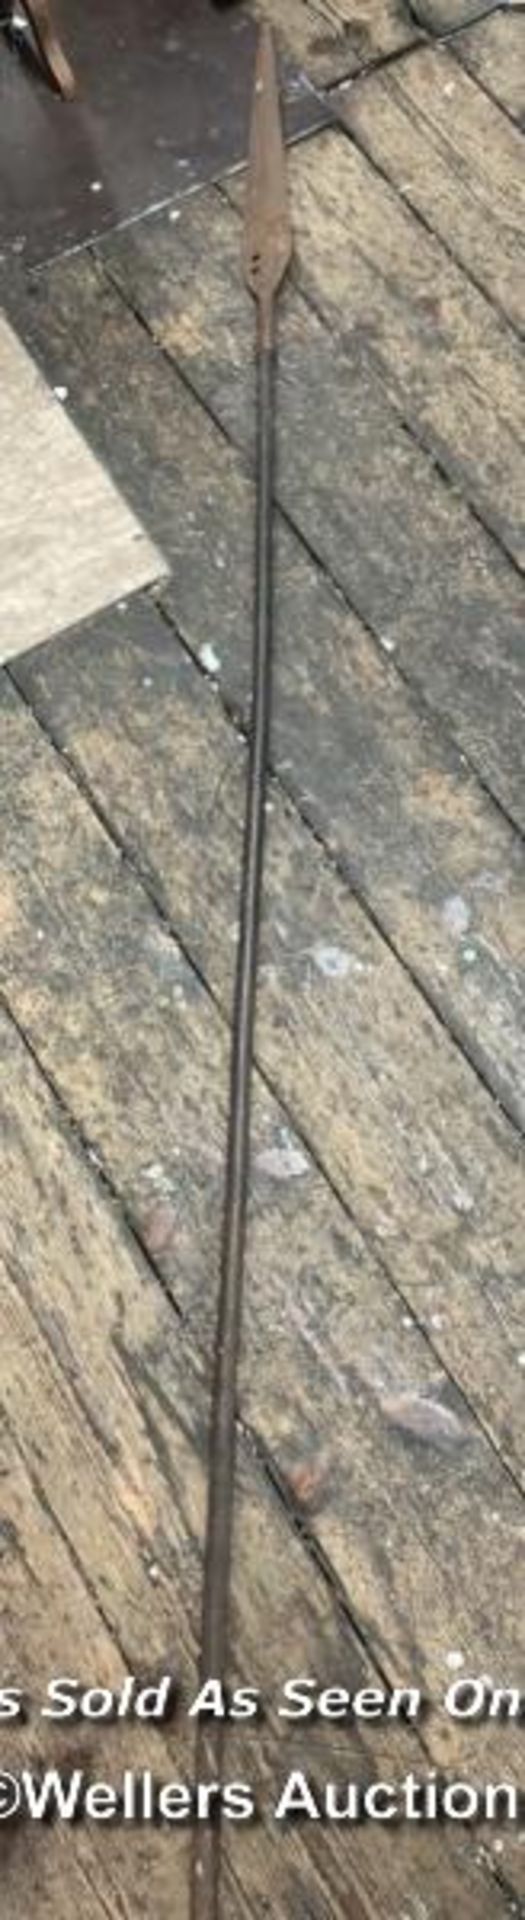 OLD SPEAR, 210CM LONG - Image 2 of 2